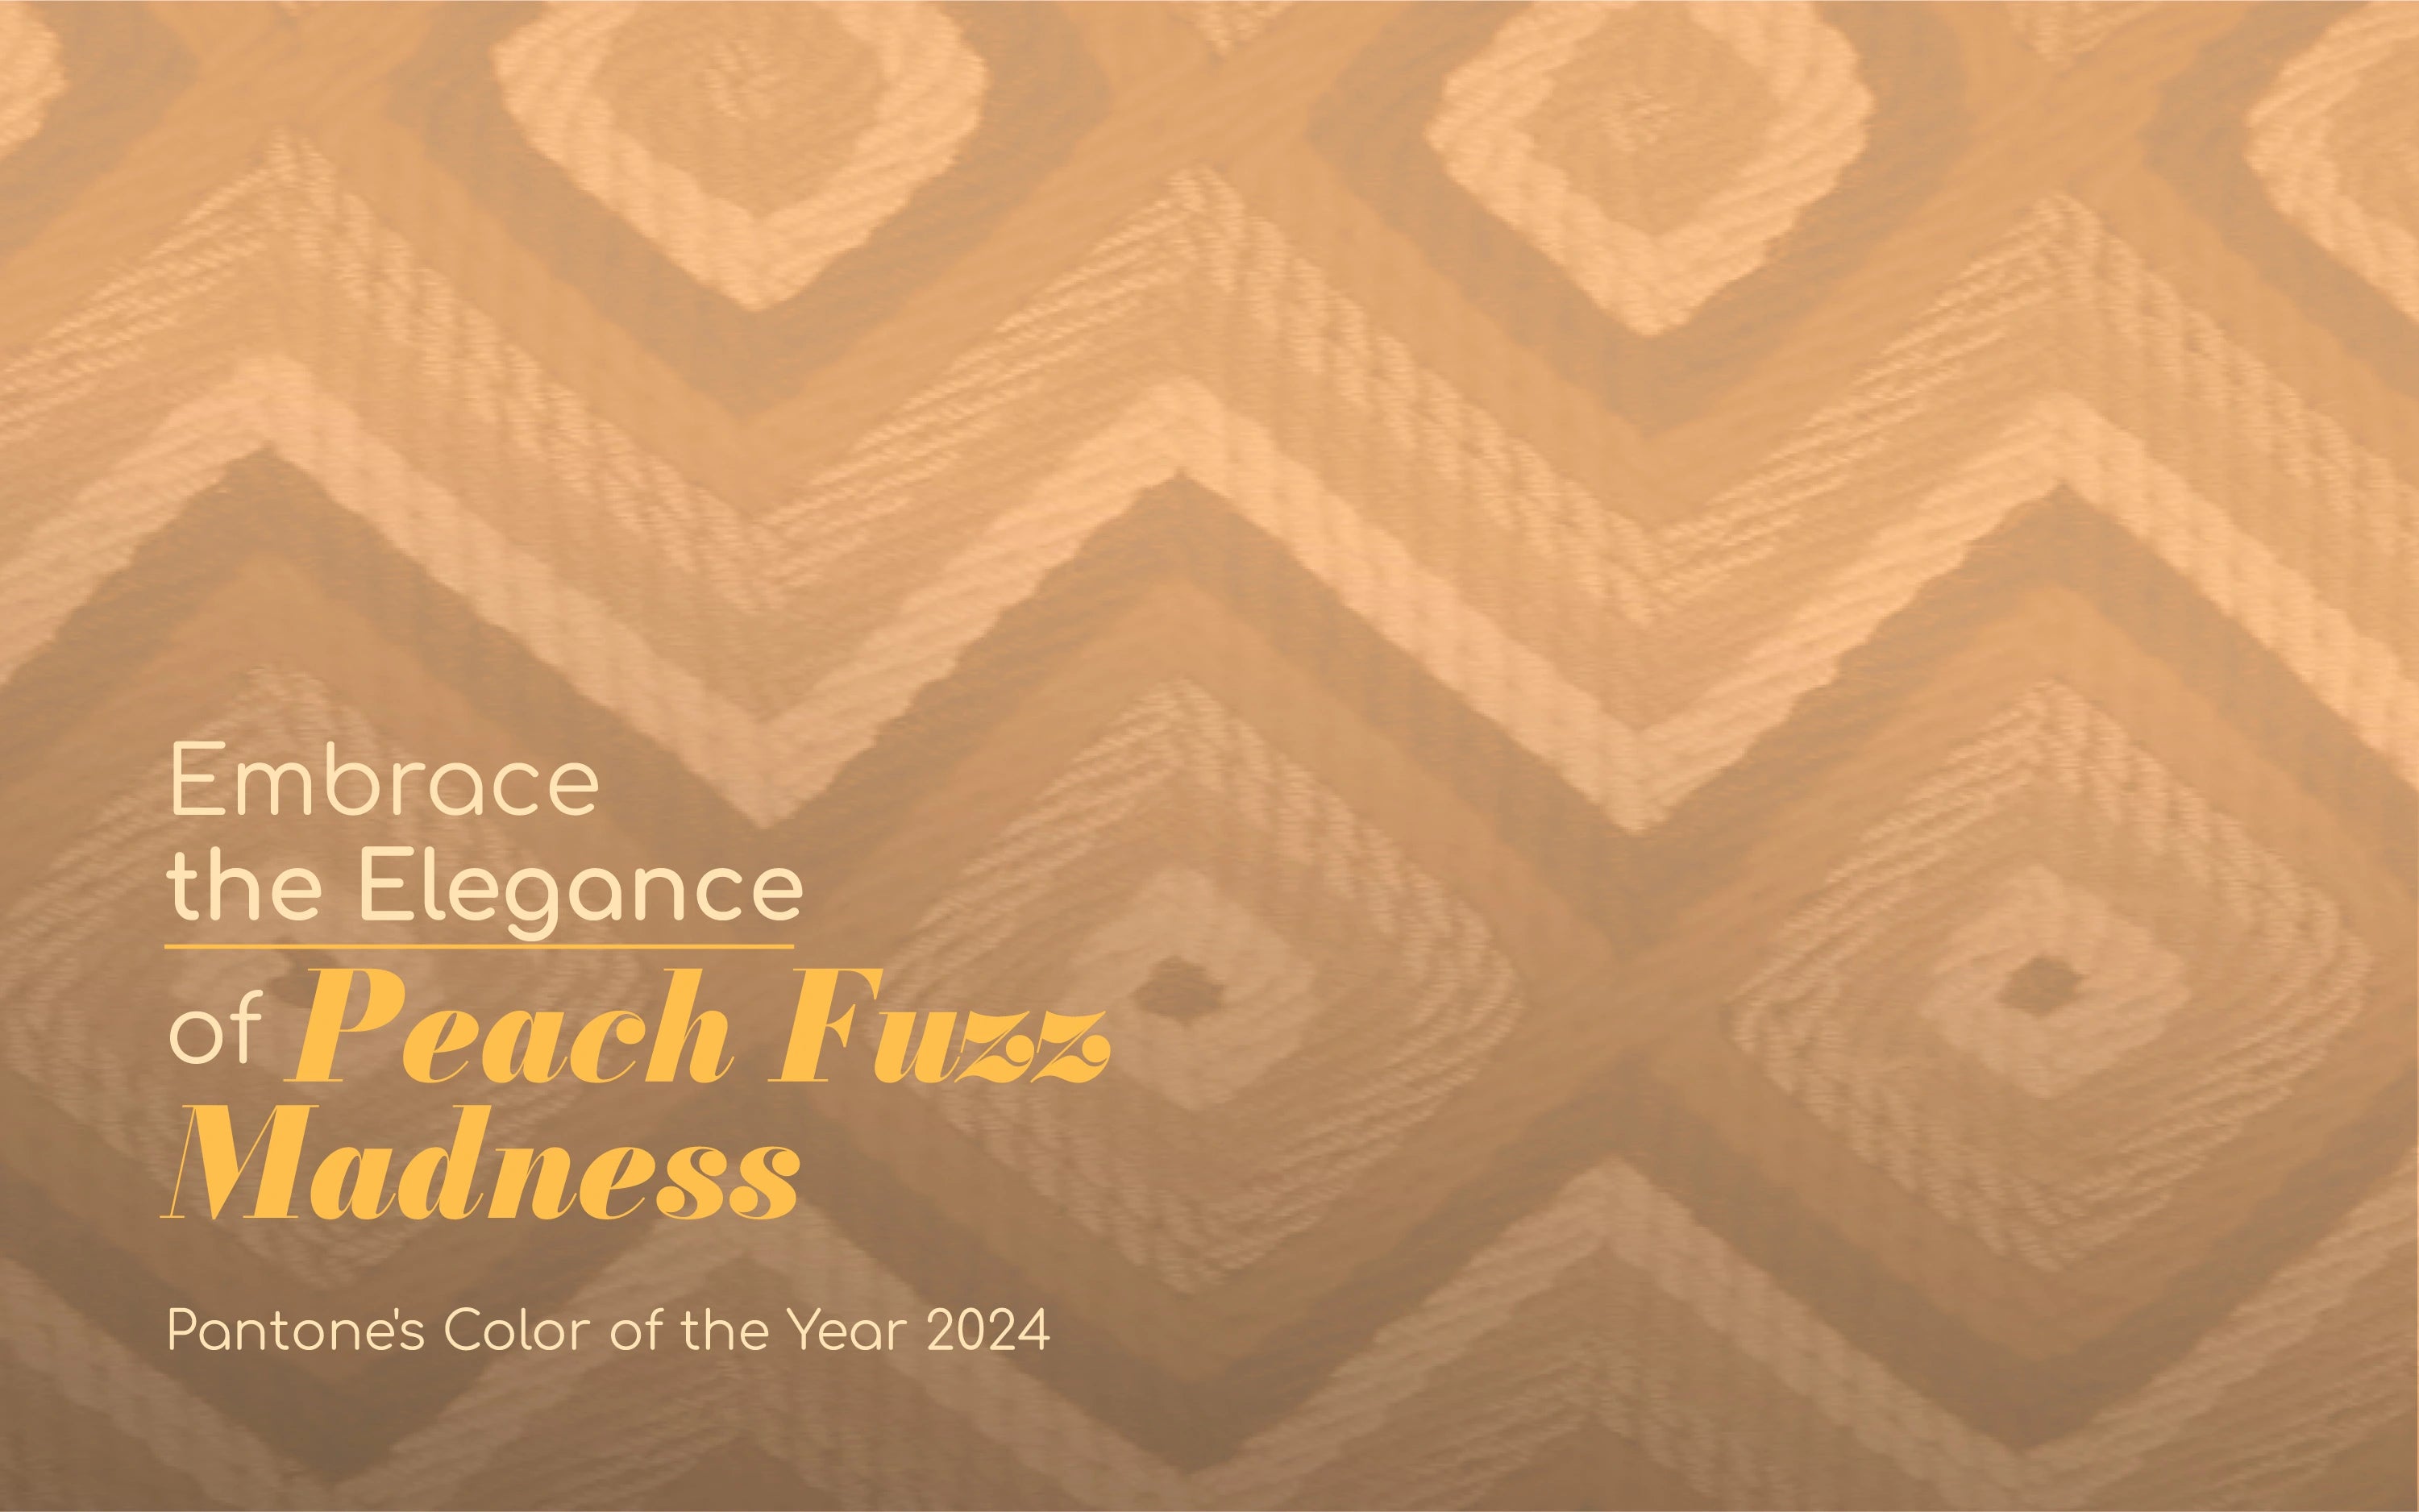 Embrace the Elegance of Peach Fuzz Madness: Pantone's Color of the Year 2024